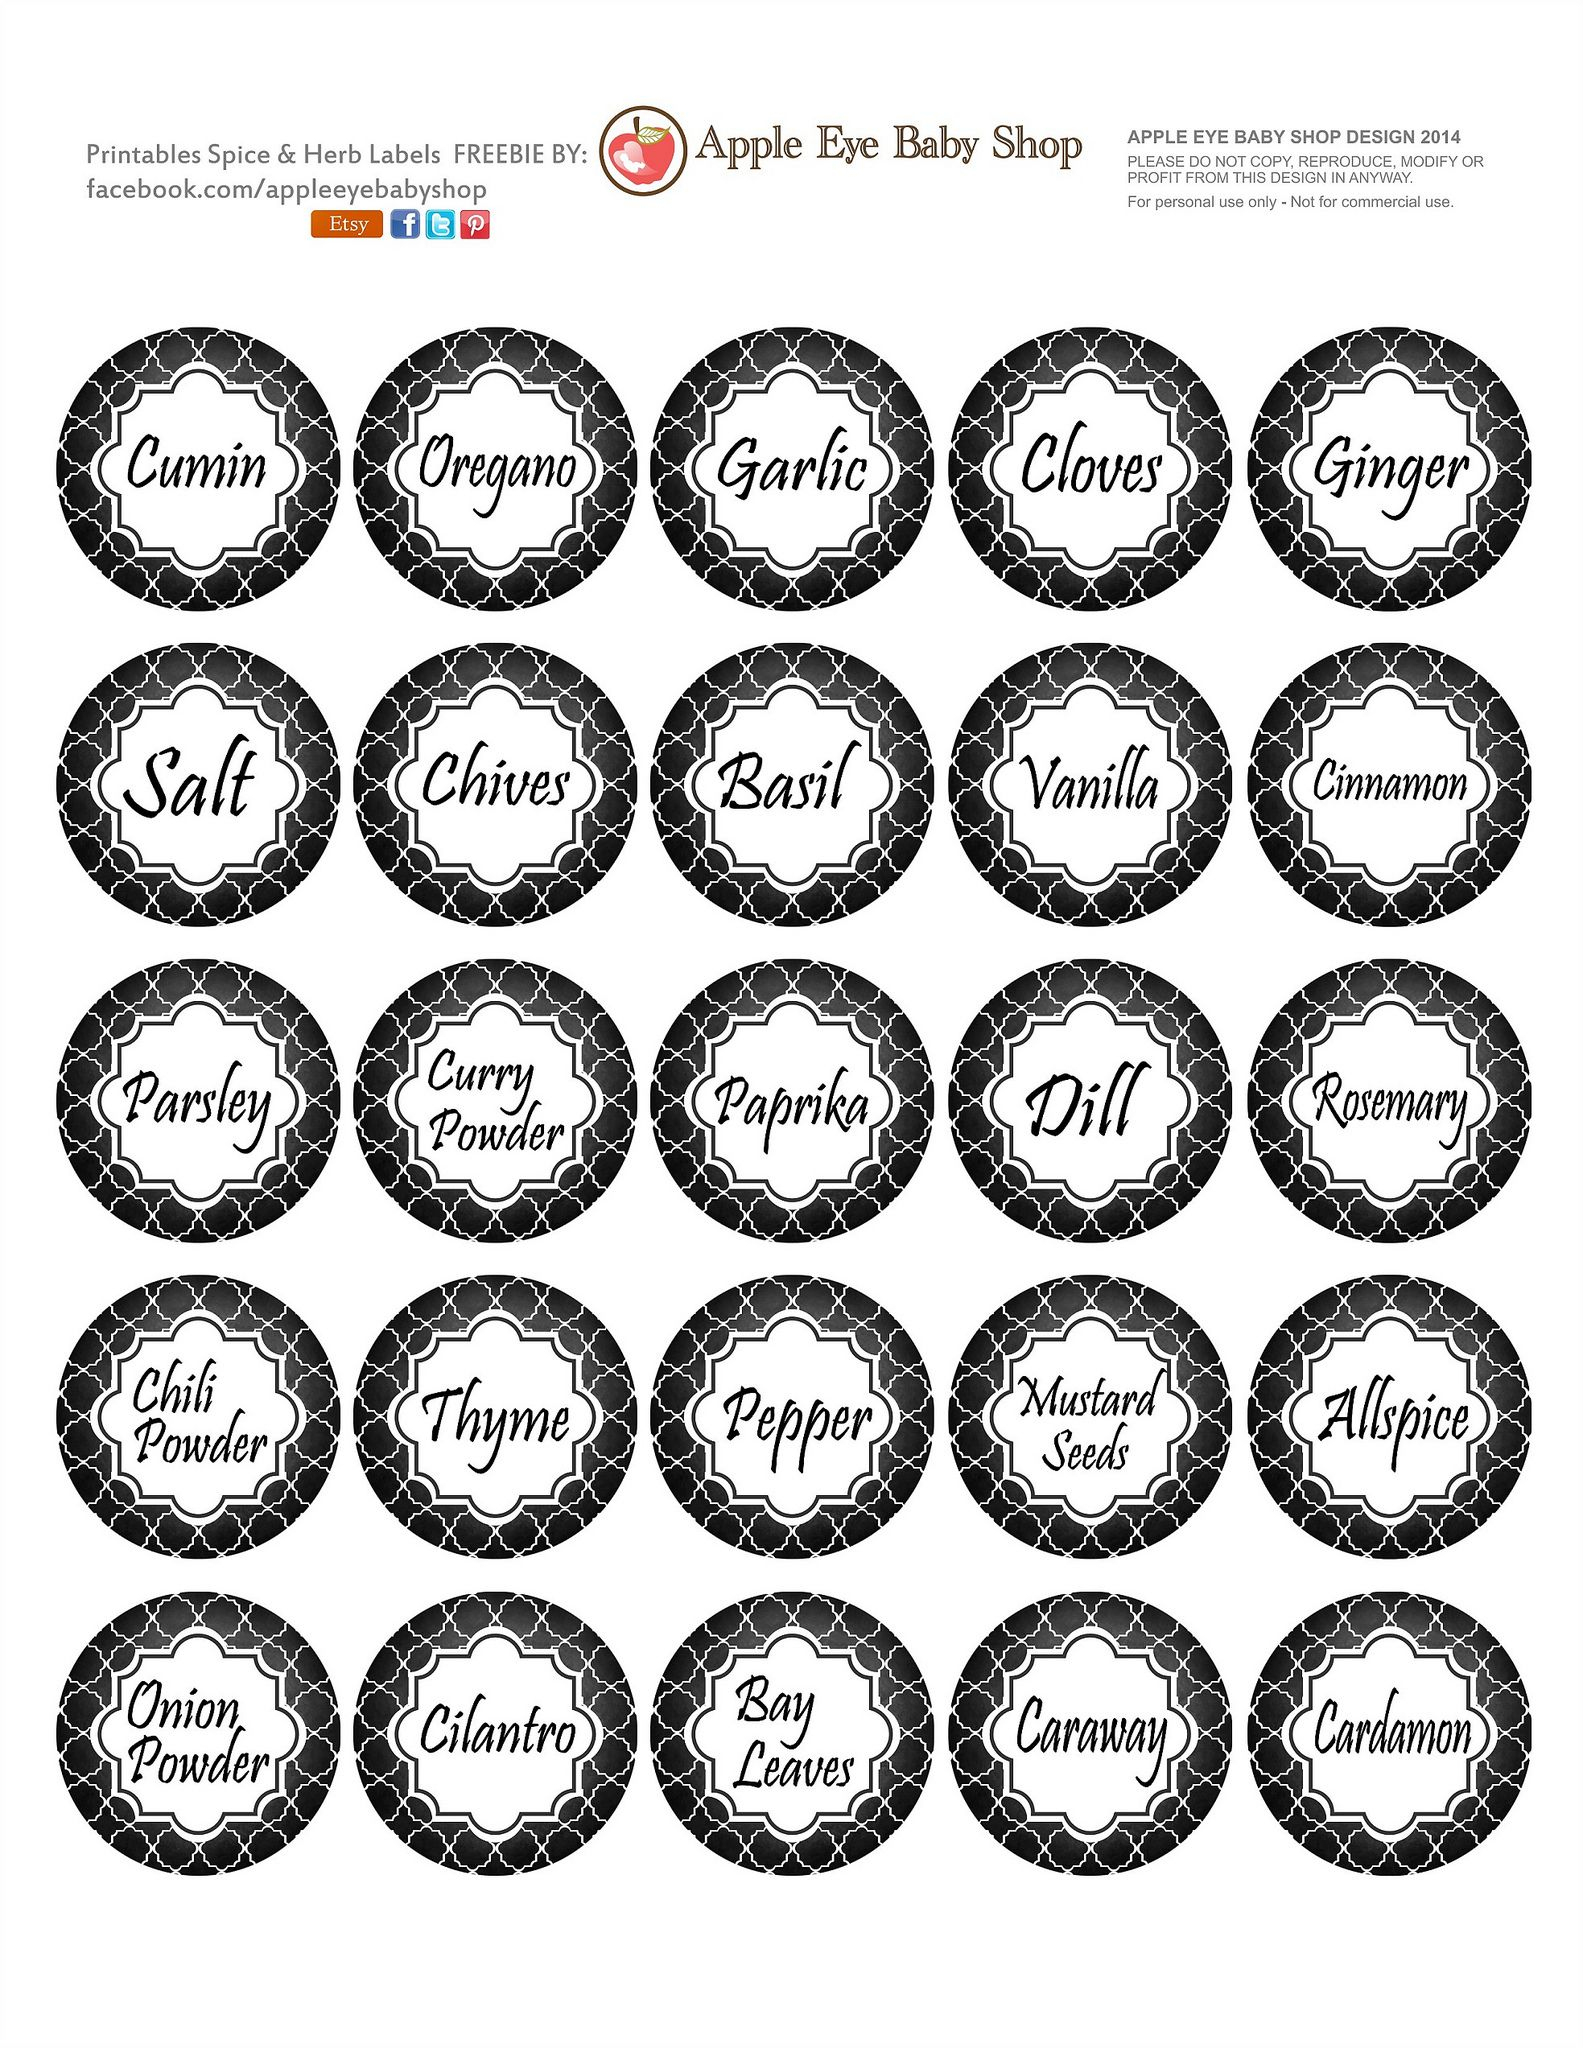 All Sizes | Free Printables | Spice &amp;amp; Herb Labelsapple Eye Baby - Free Printable Herb Labels